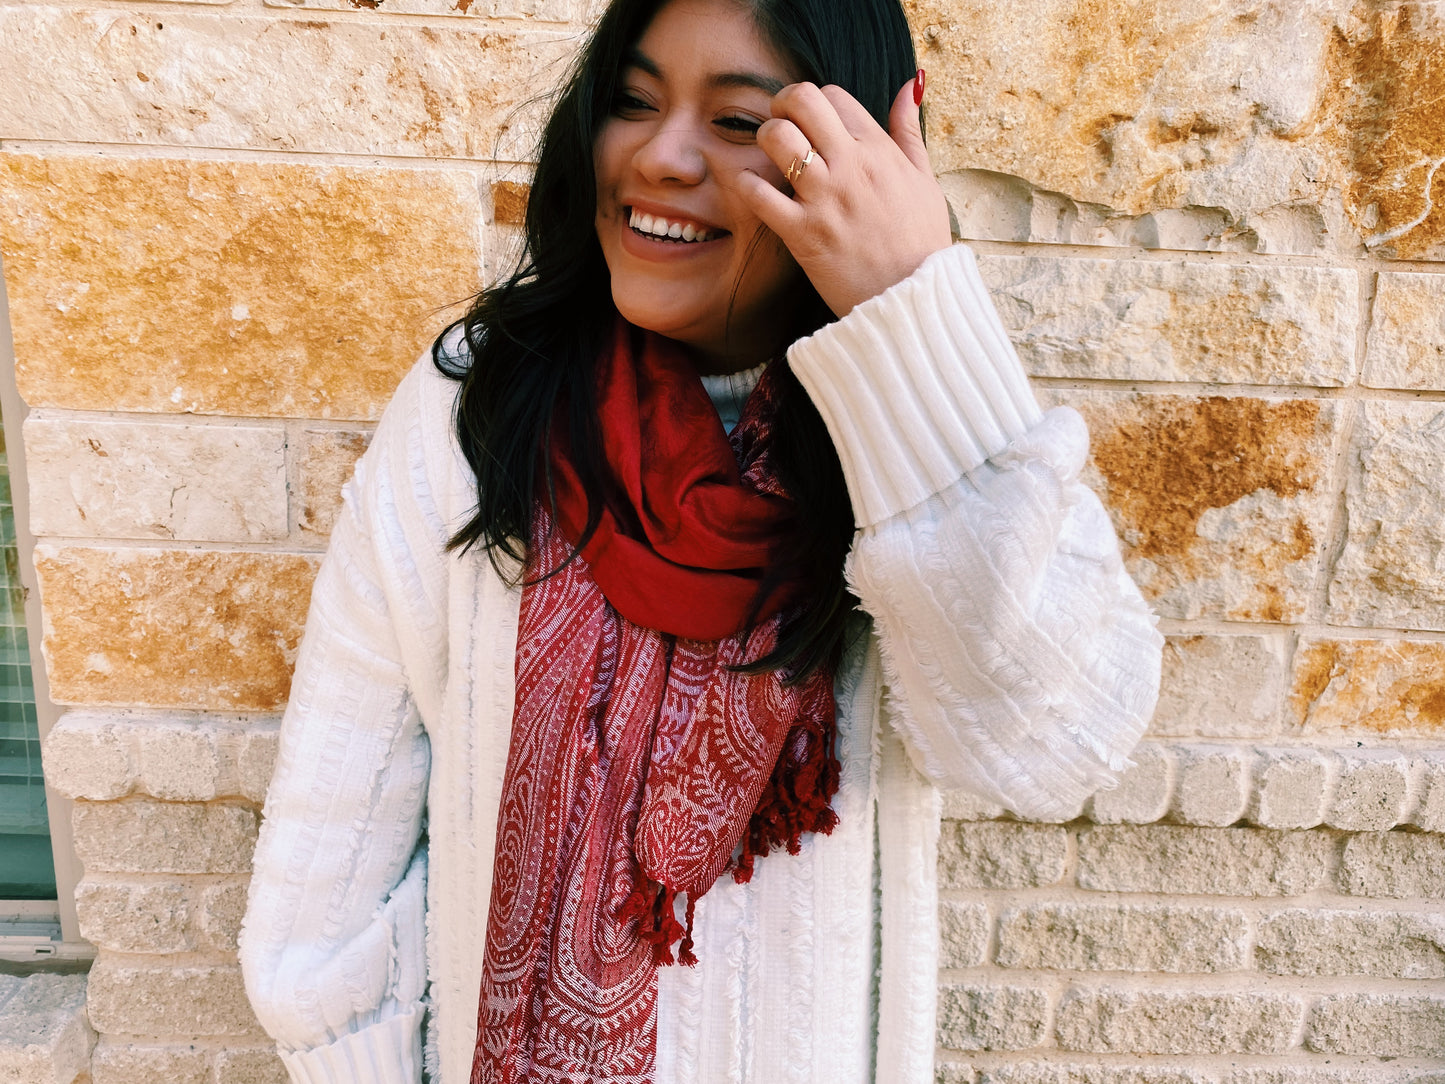 Red & White Scarf